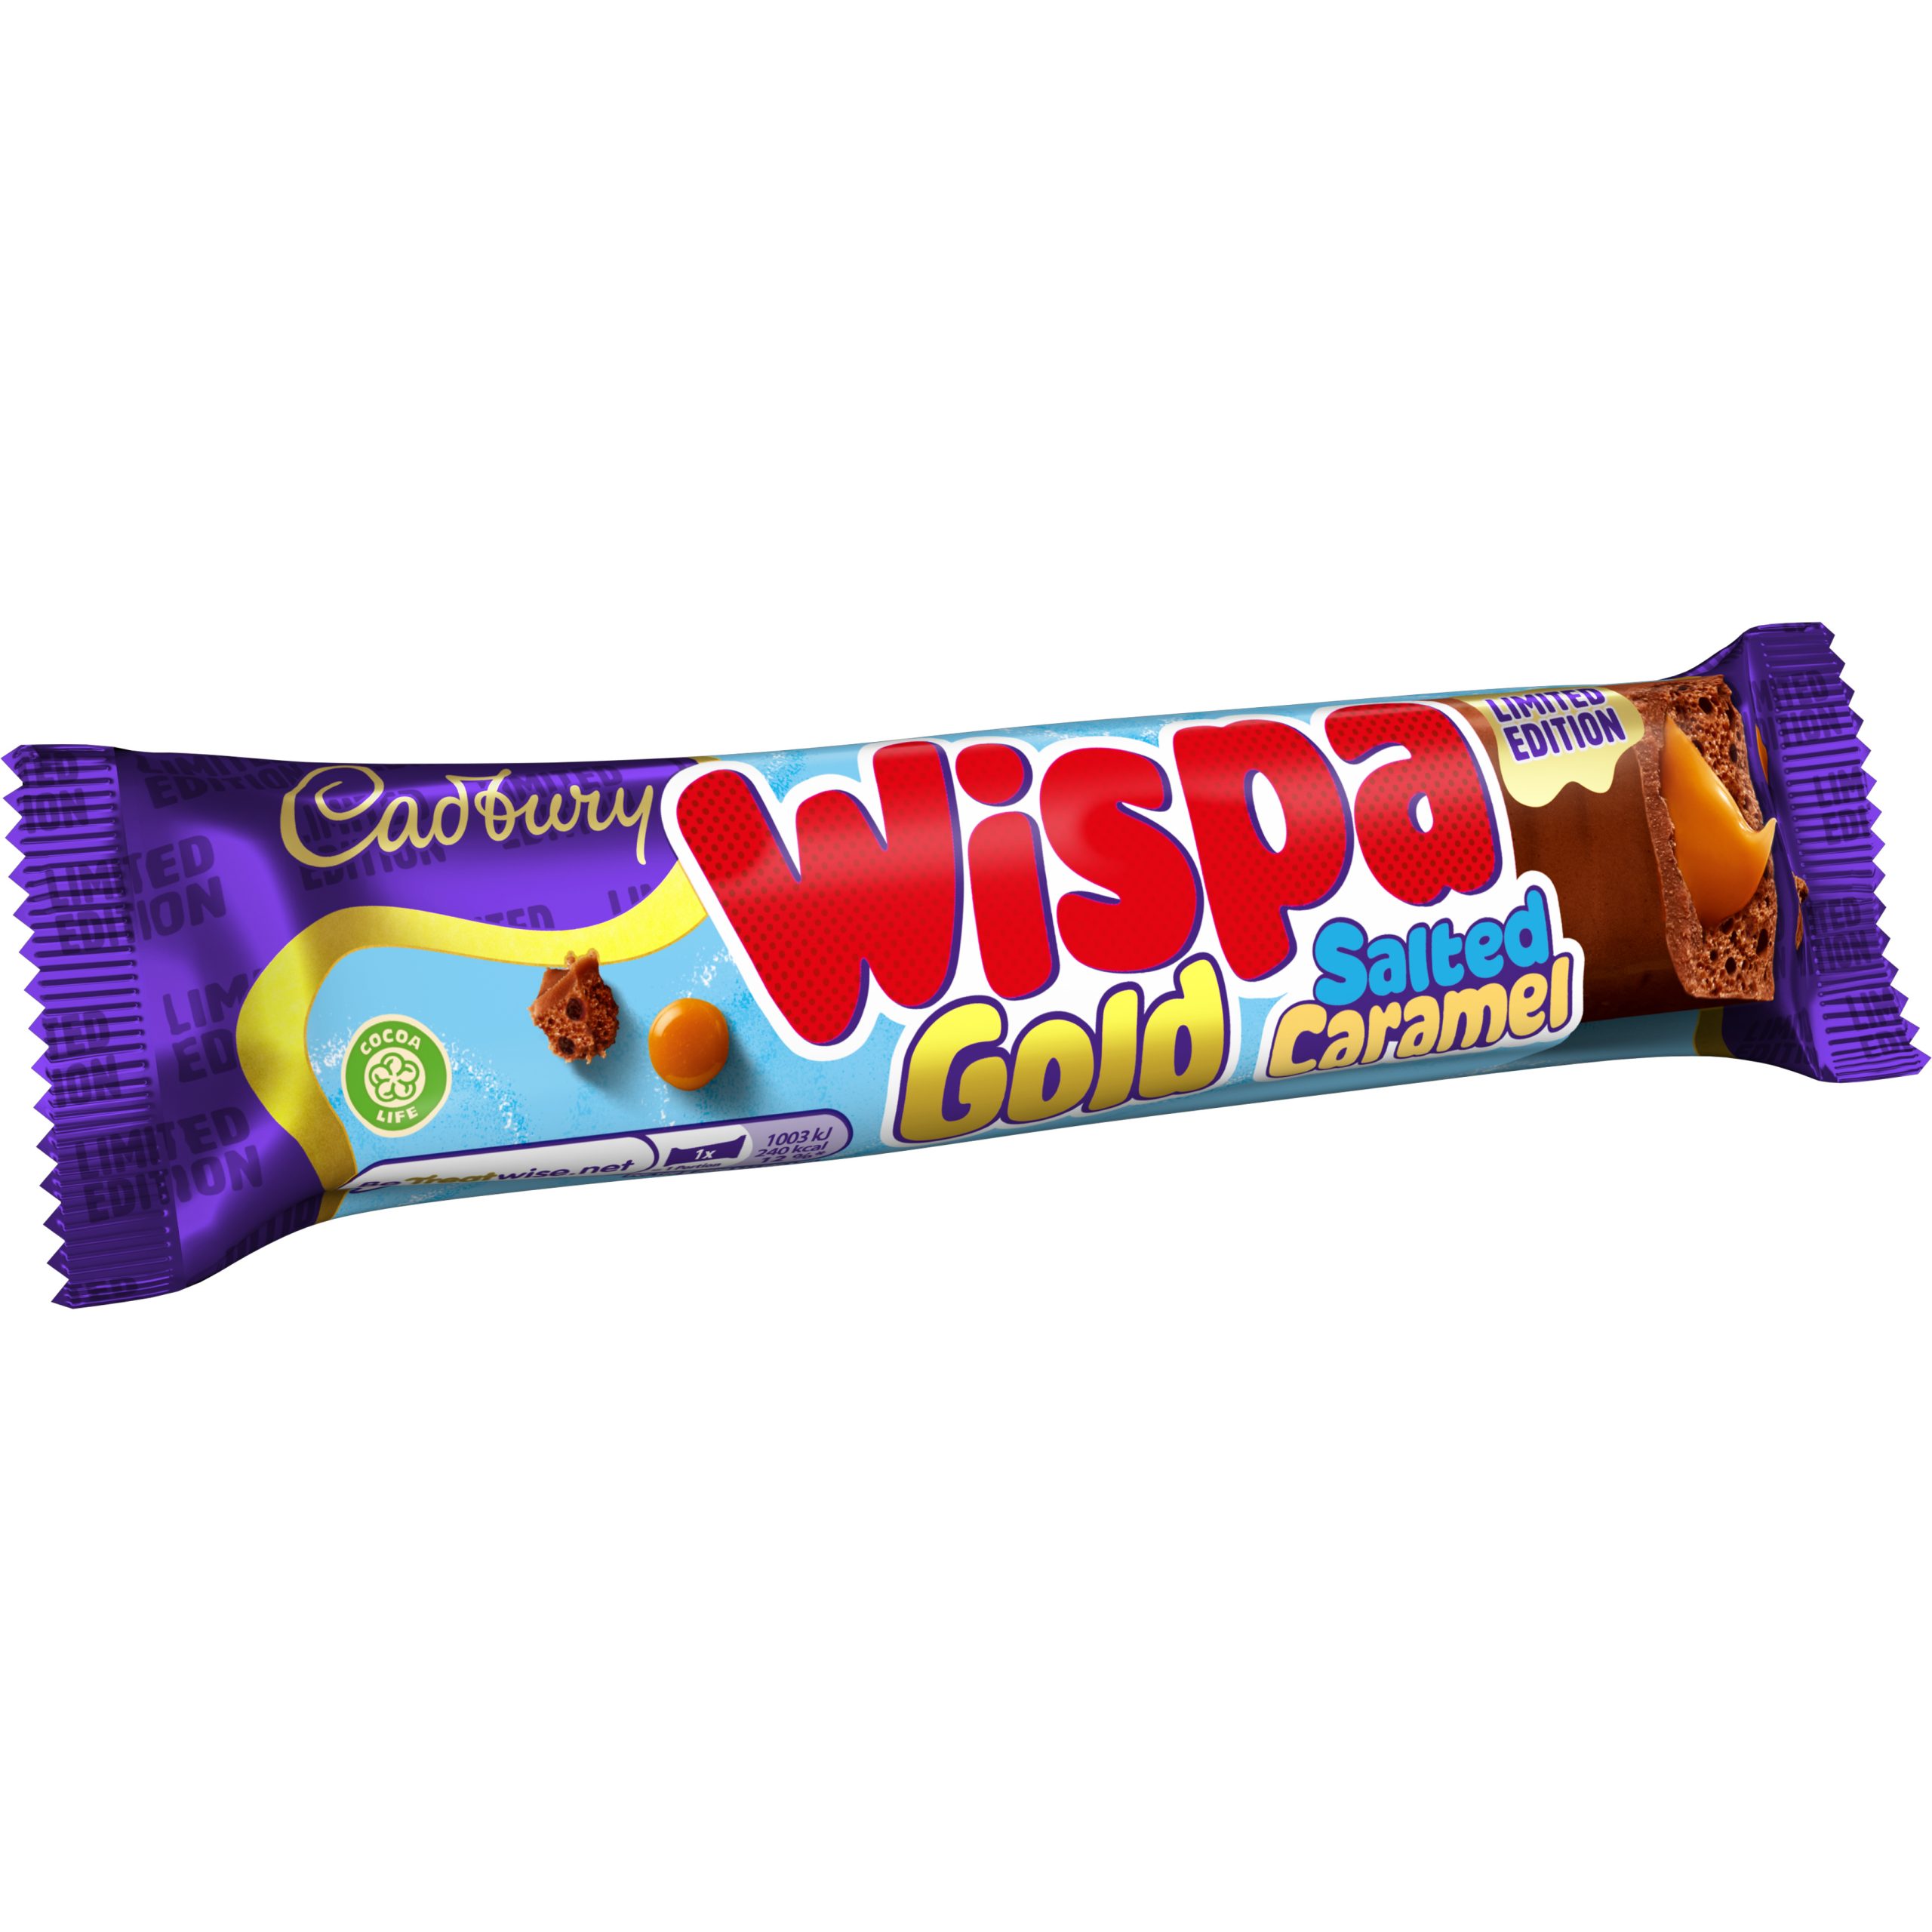 Retailers set to strike gold with new Wispa Gold limited-edition